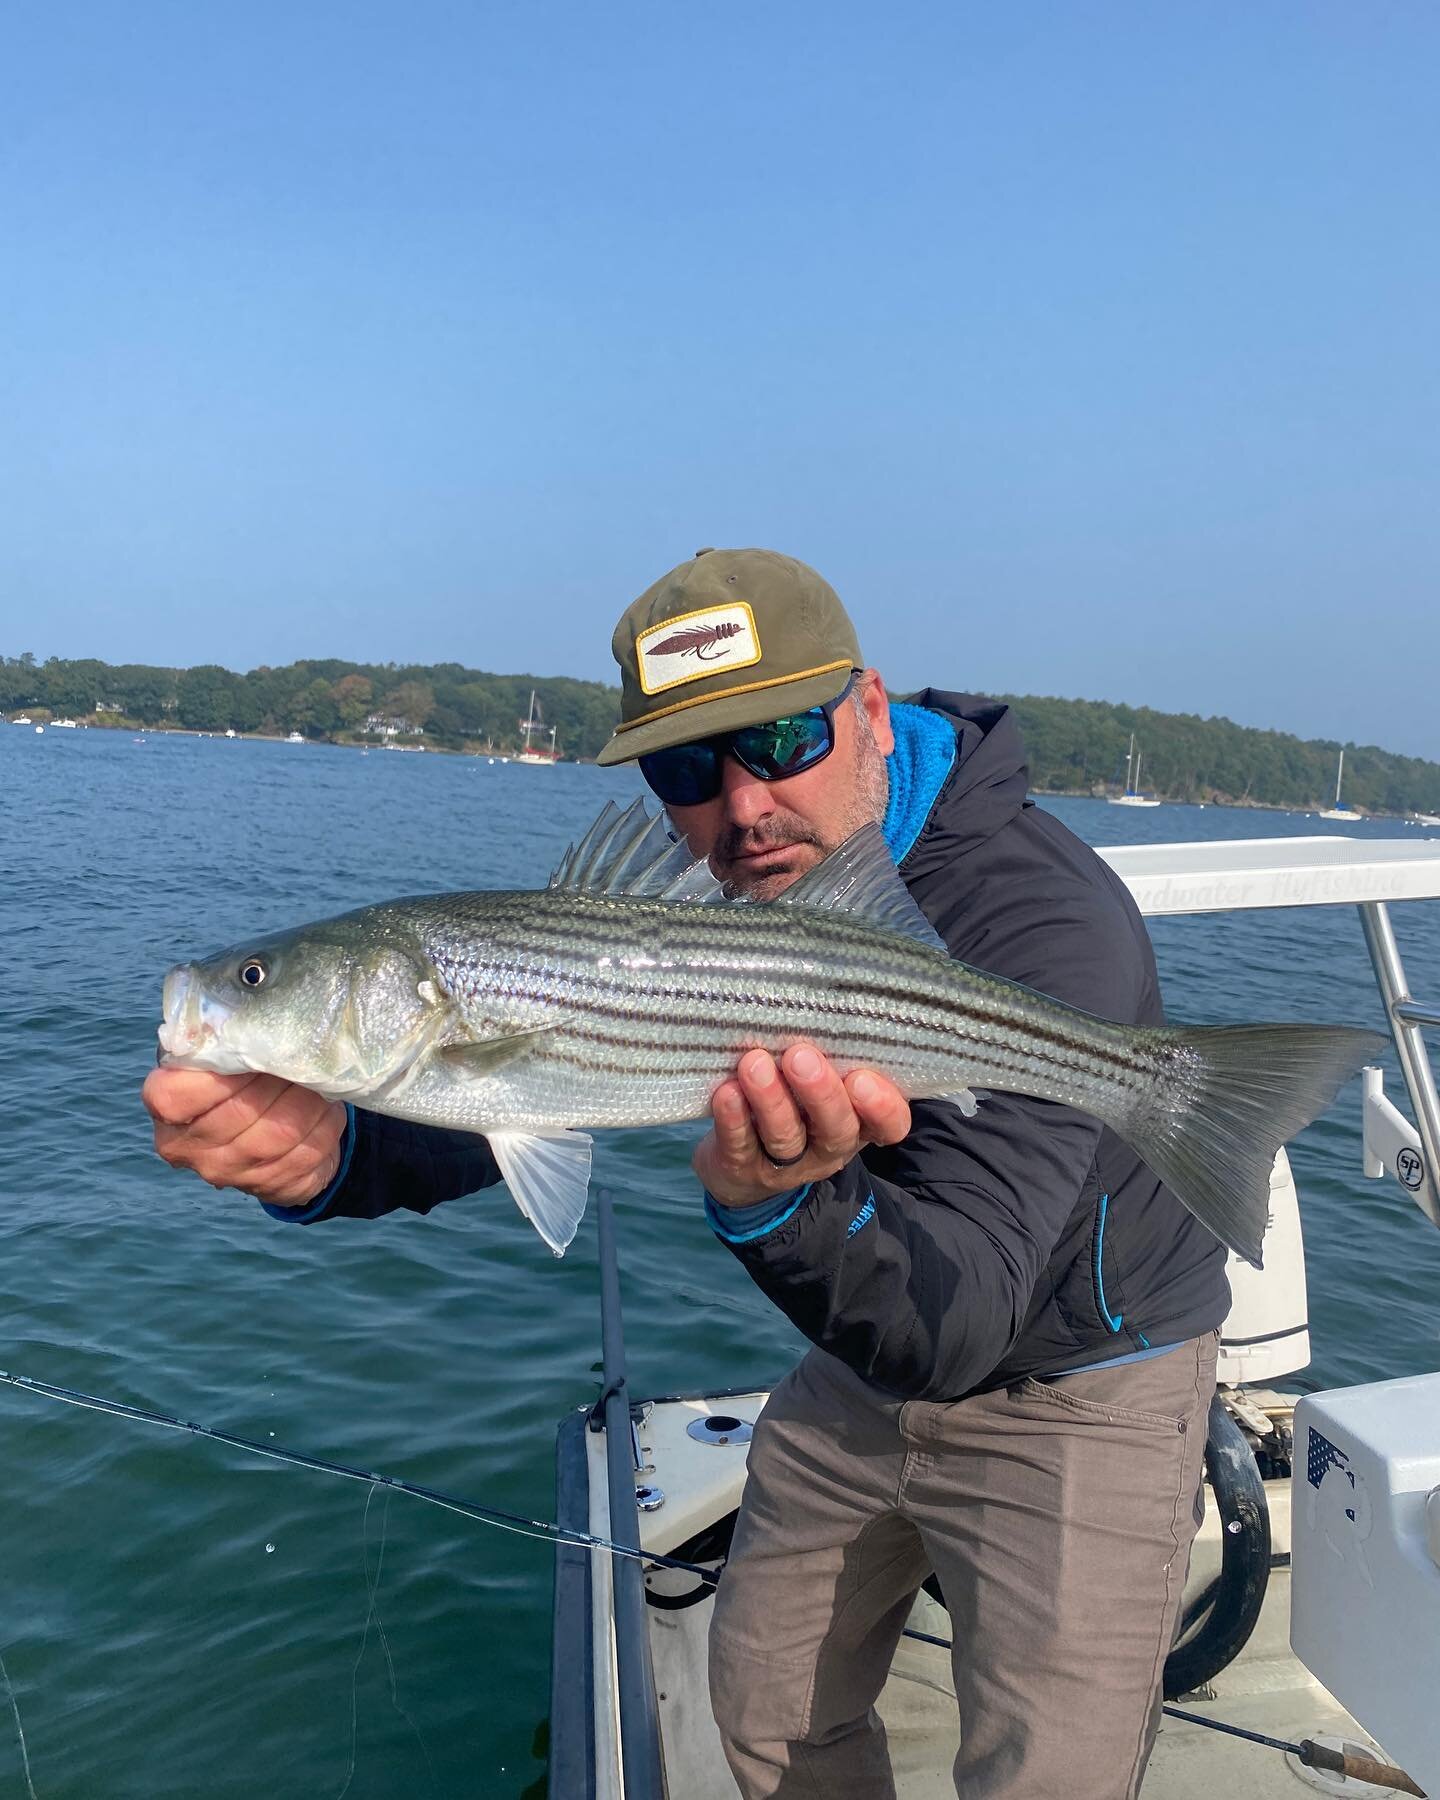 Shout out to @mrb3207 ! Was awesome to get out and get a few sight casting opportunities. Don&rsquo;t get a lot of bow time so it was much appreciated. Gotta try to get out as much as possible!!
#stripedbass #cascobay #catchandrelease #coltonfly #mai